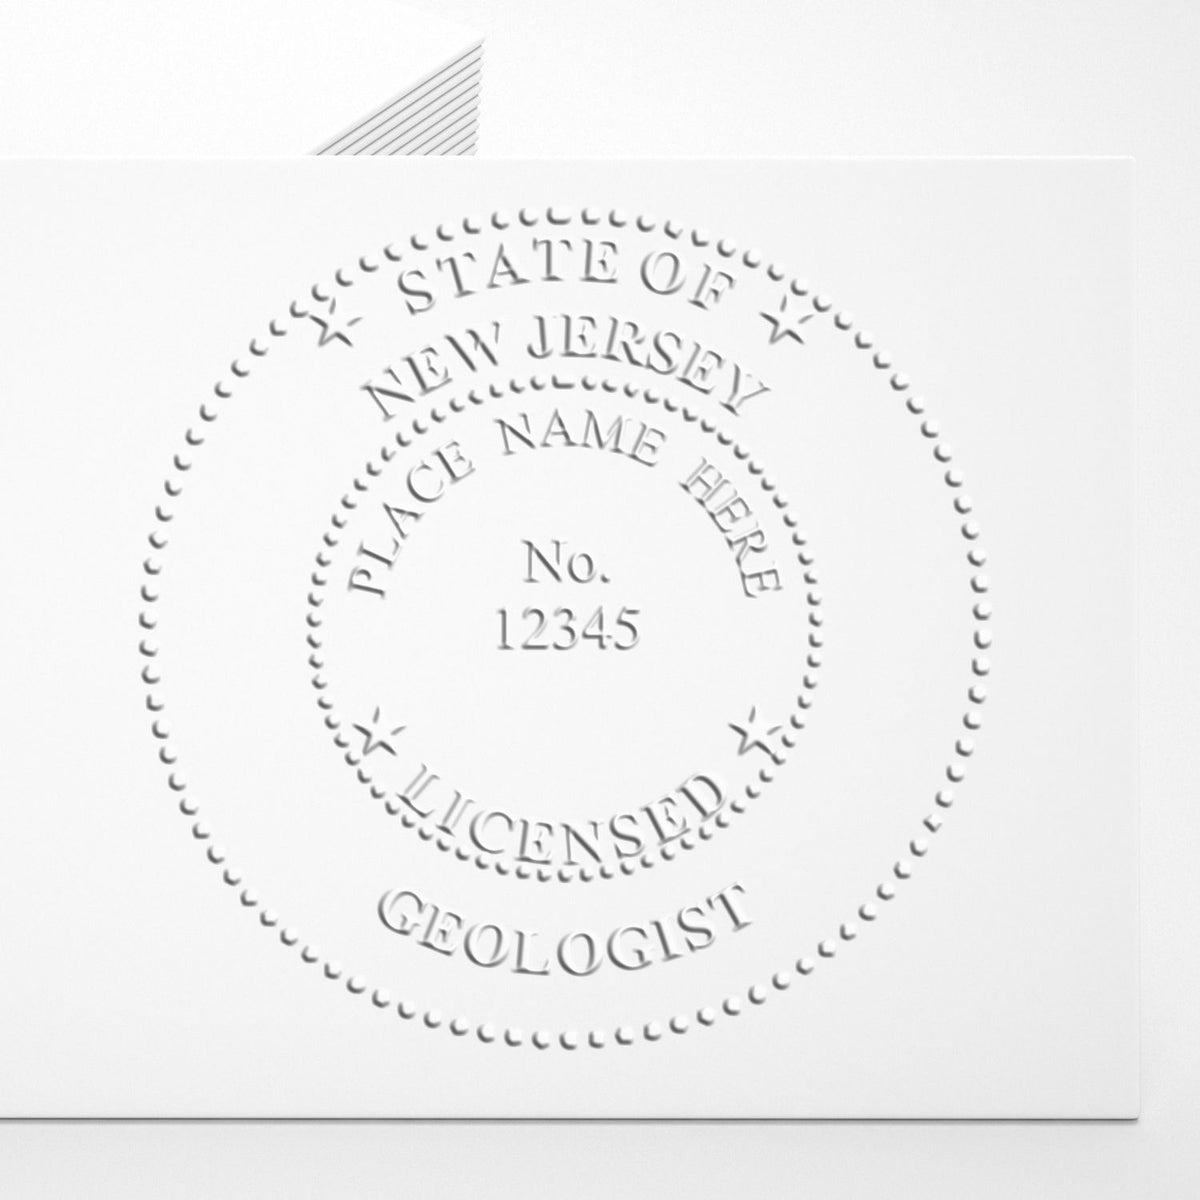 An in use photo of the Soft New Jersey Professional Geologist Seal showing a sample imprint on a cardstock